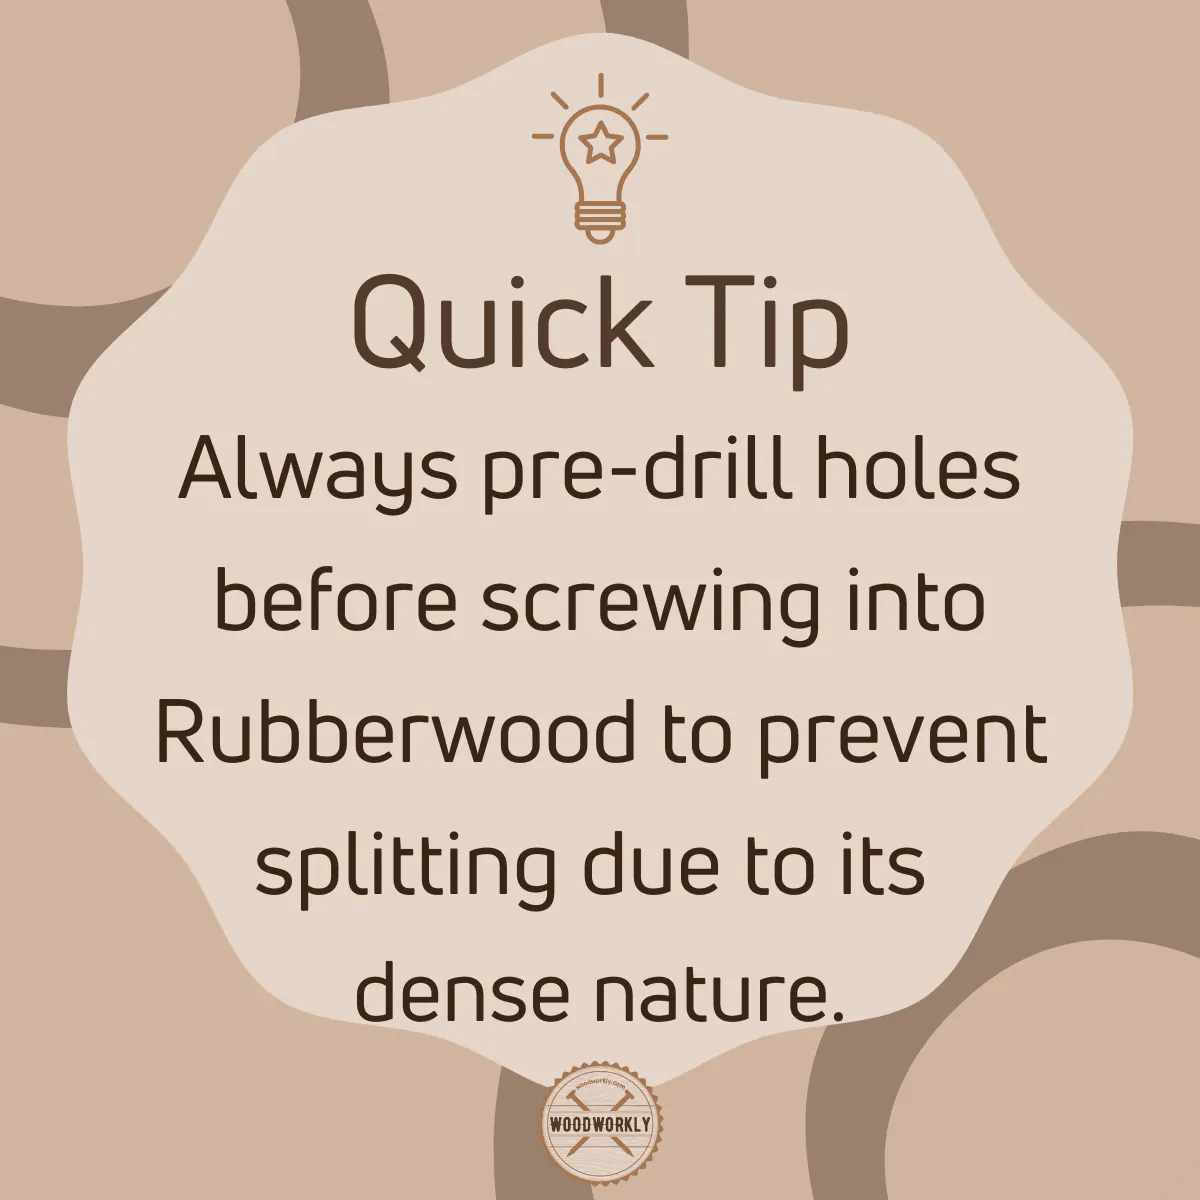 Tip for working with Rubberwood